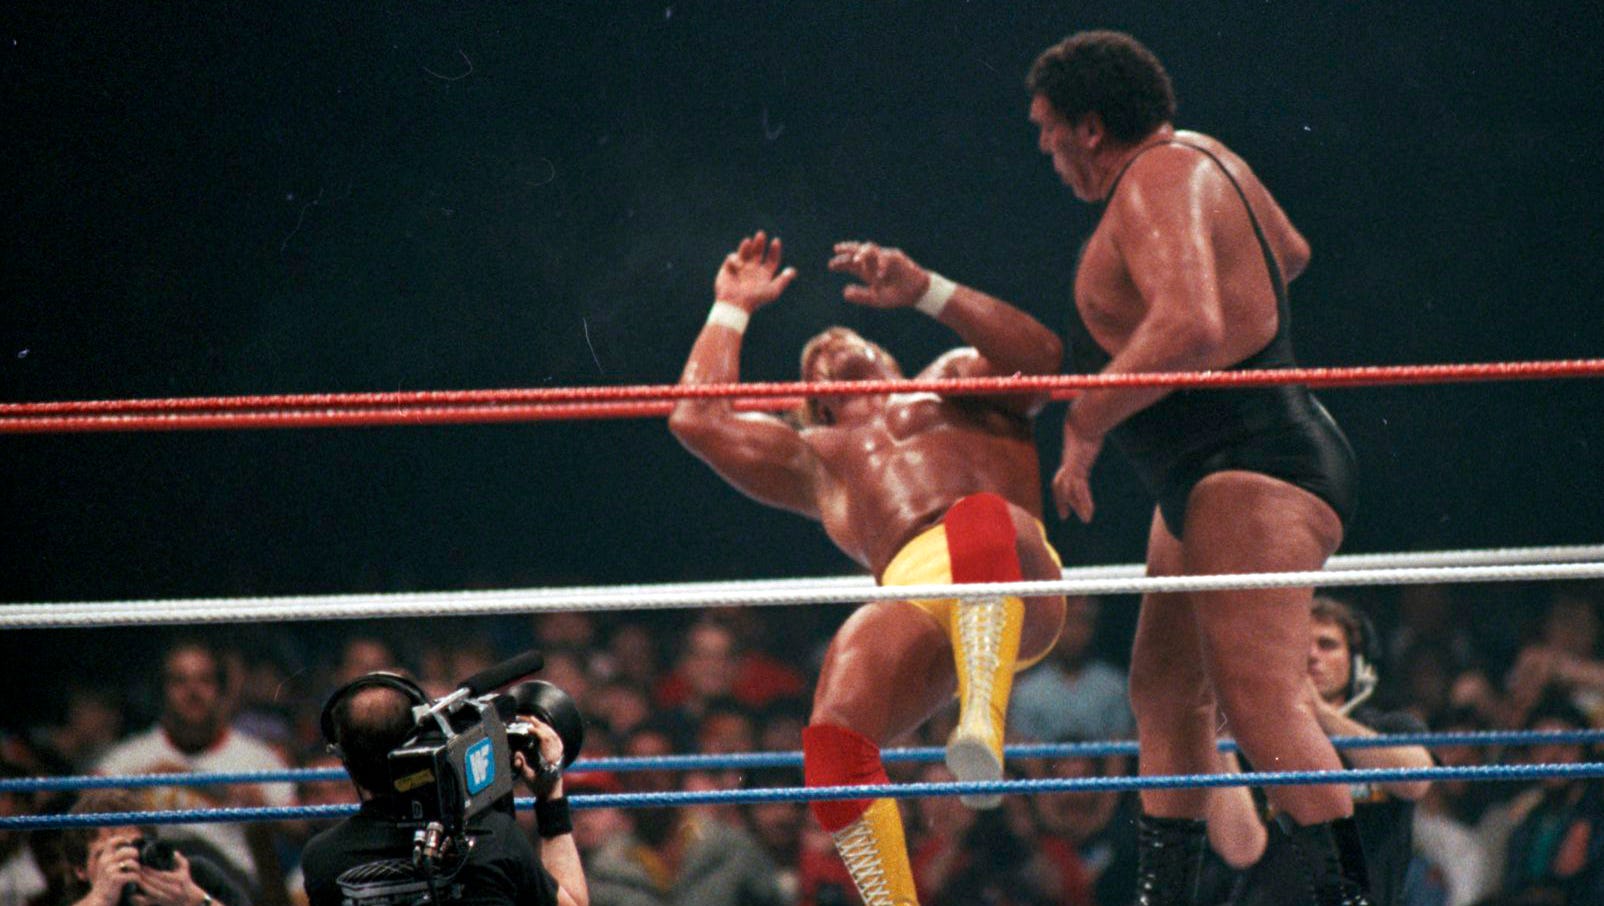 Andre the Giant gets the best of Hulk Hogan early in their match, which lasted more than 12 minutes.